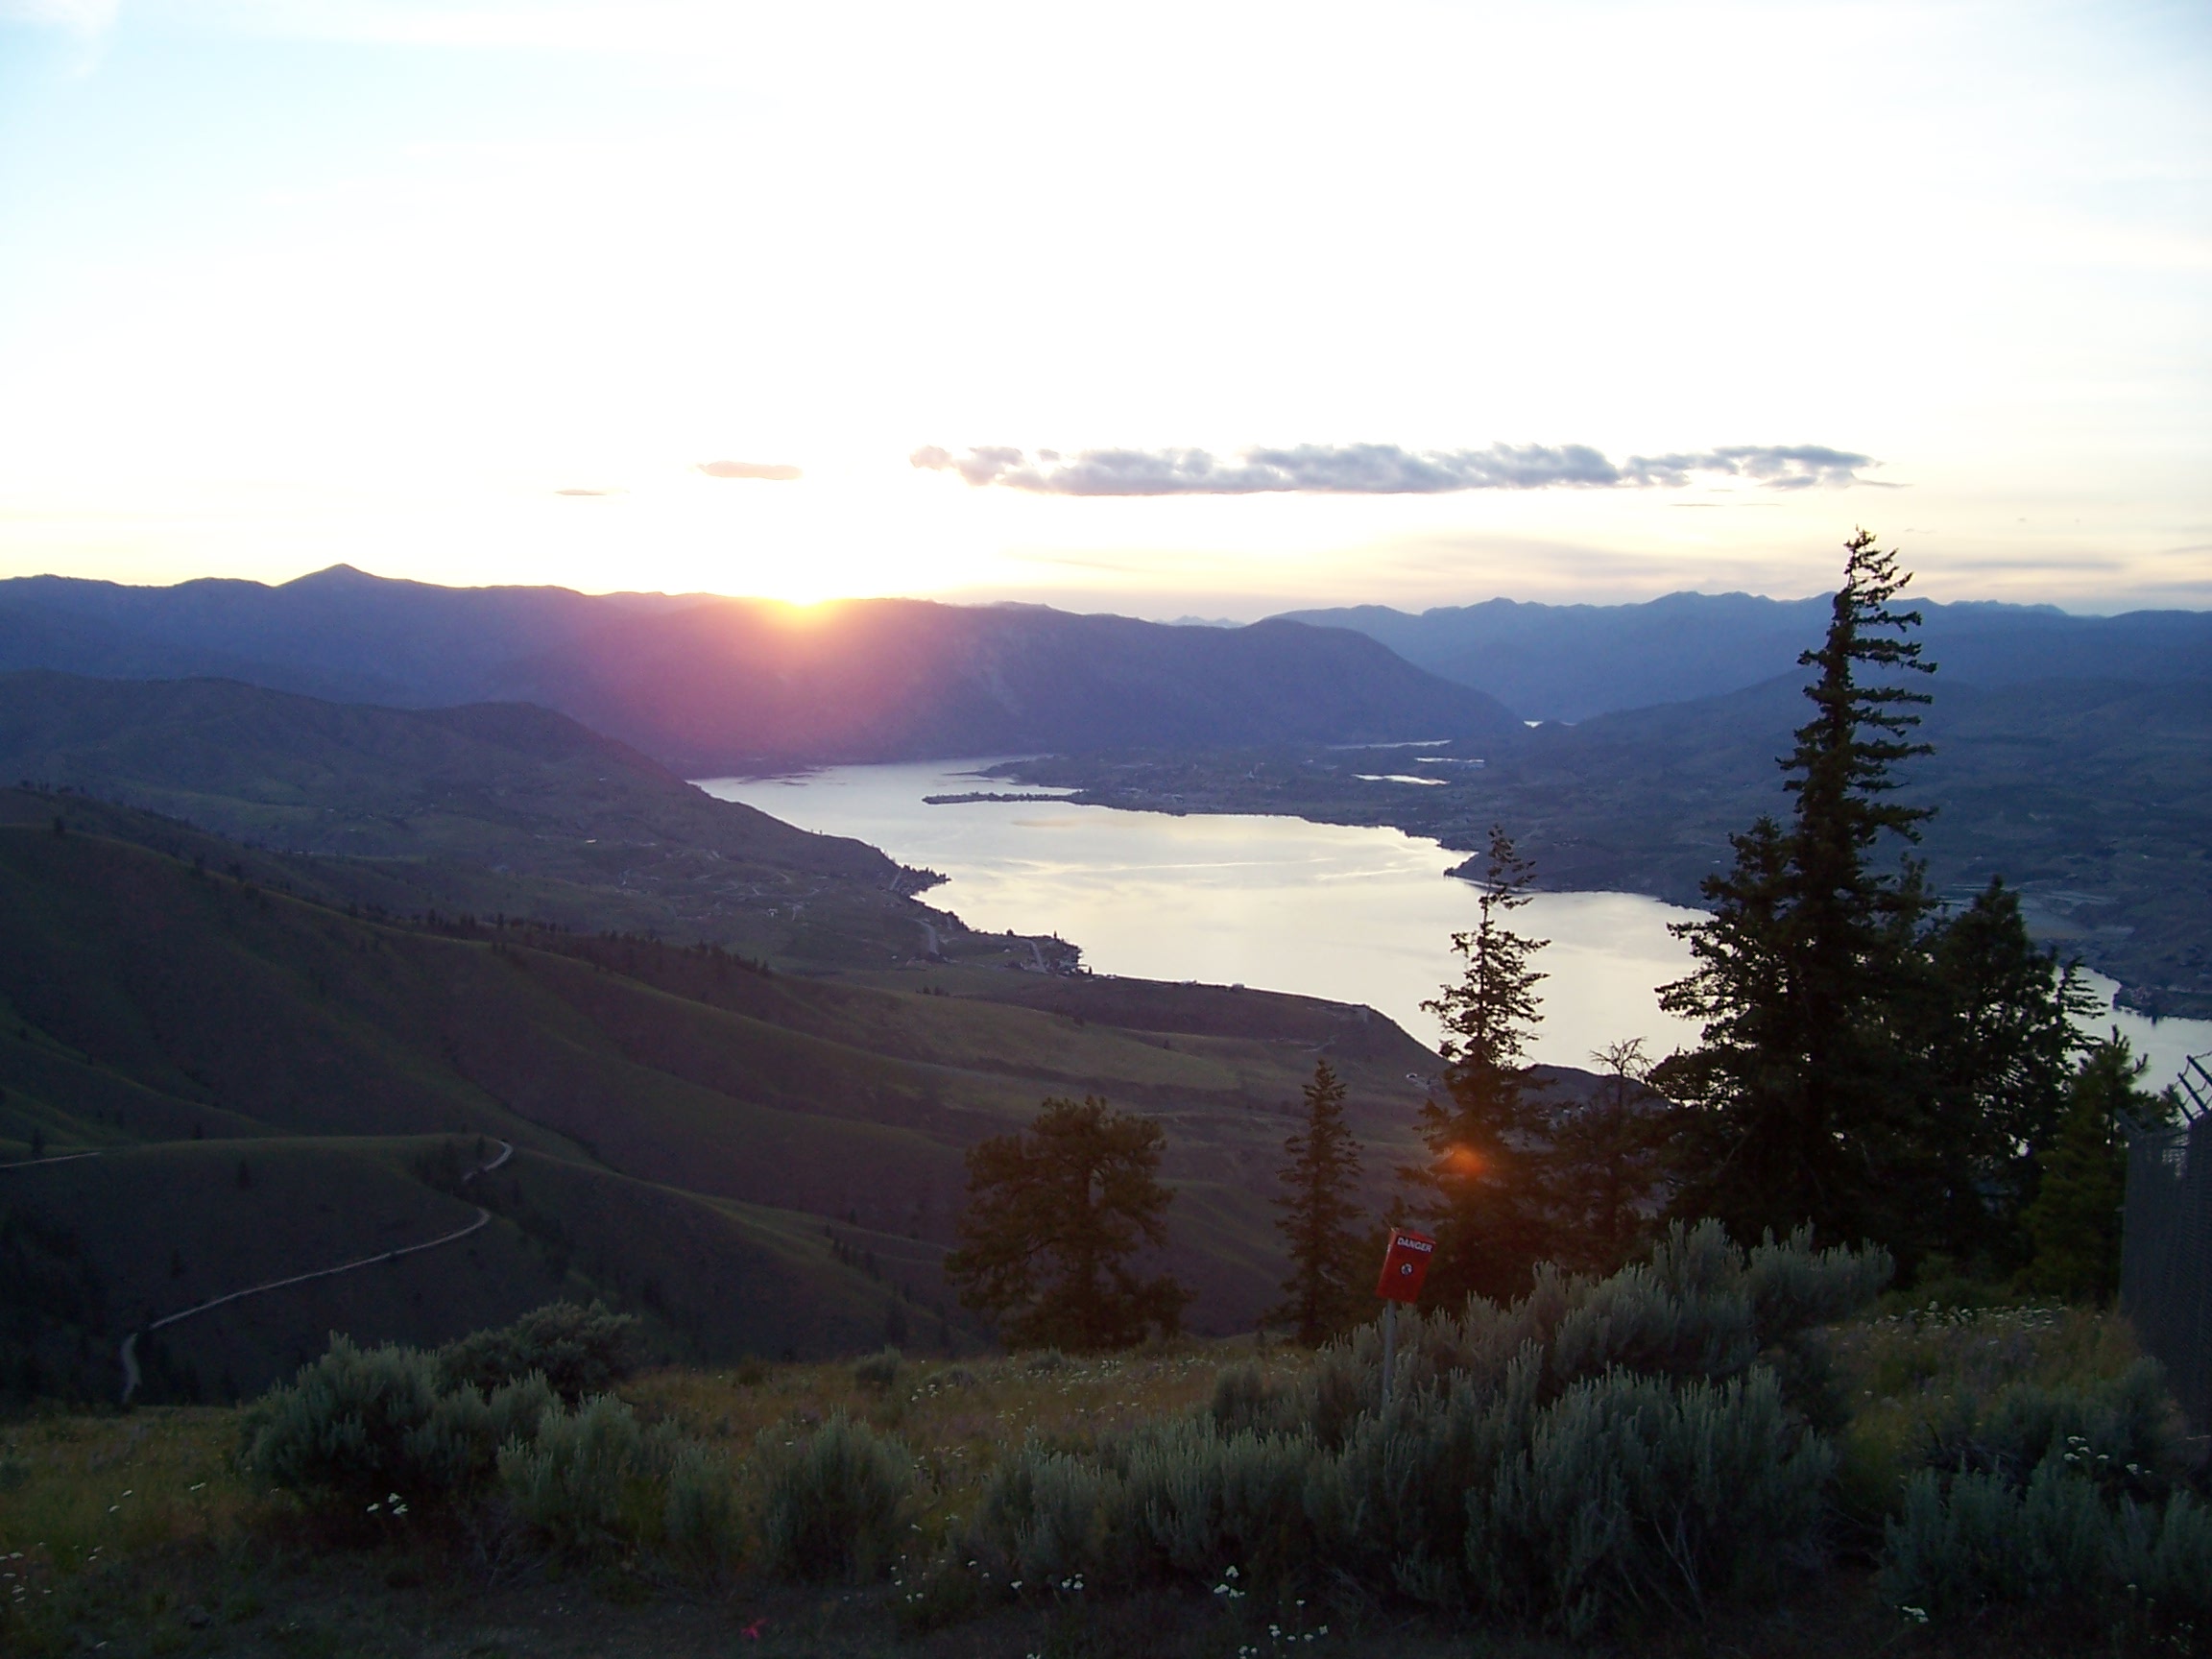 Sunset in the Chelan Valley